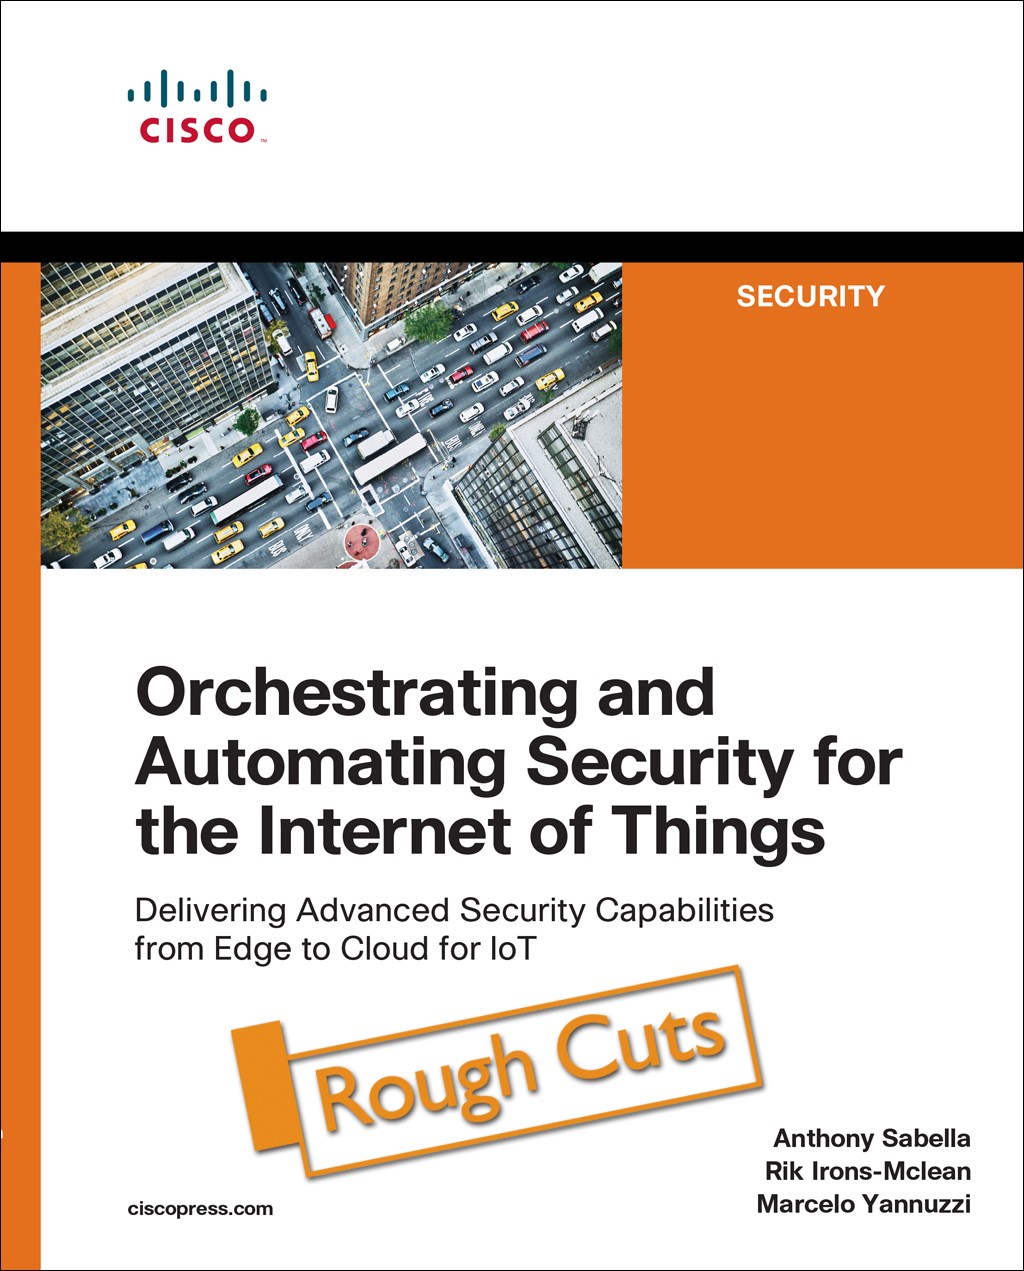 Orchestrating and Automating Security for the Internet of Things: Delivering Advanced Security Capabilities from Edge to Cloud for IoT, Rough Cuts